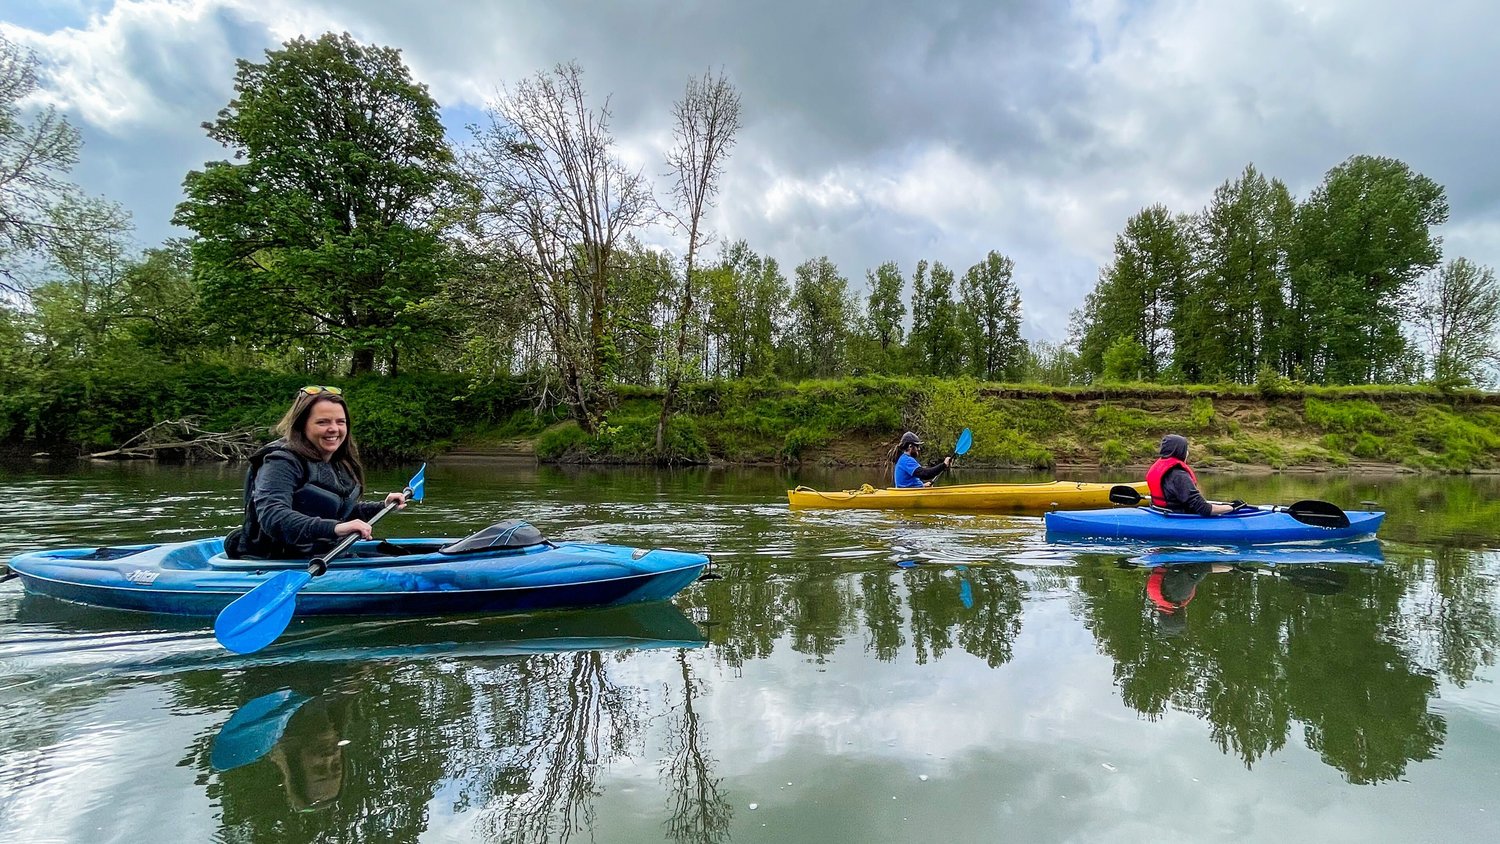 From left, Justyna Tomtas, Jordan Nailon, and Isabel Vander Stoep paddle through Centralia in kayaks on the Chehalis River Wednesday morning.